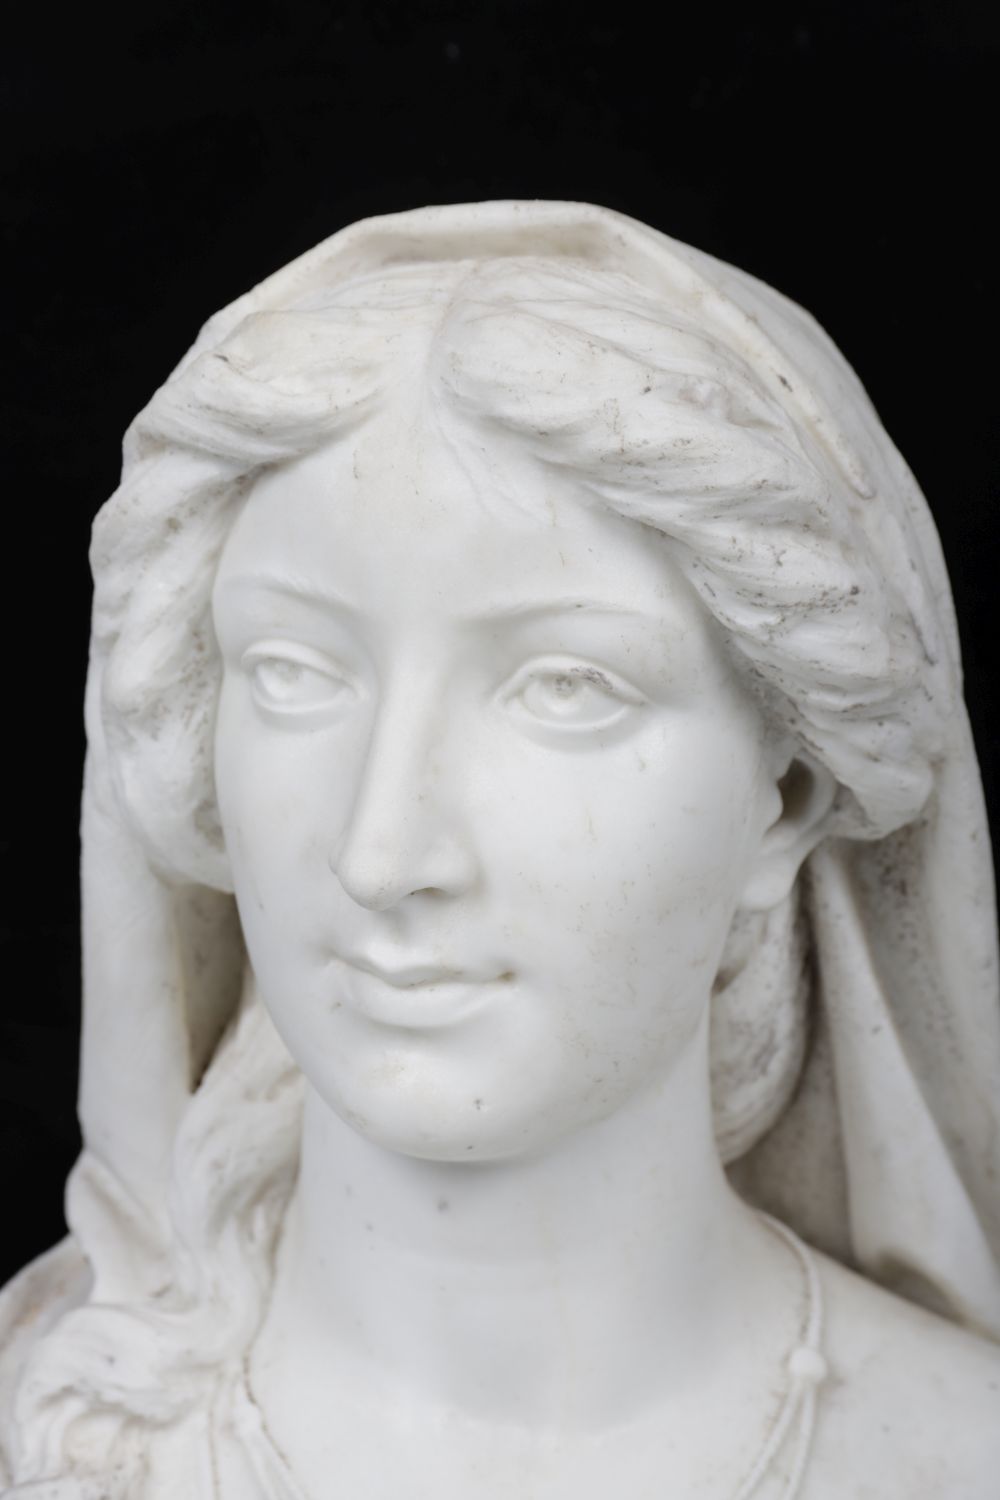 19TH-CENTURY FRENCH CARRARA MARBLE BUST - Image 2 of 4